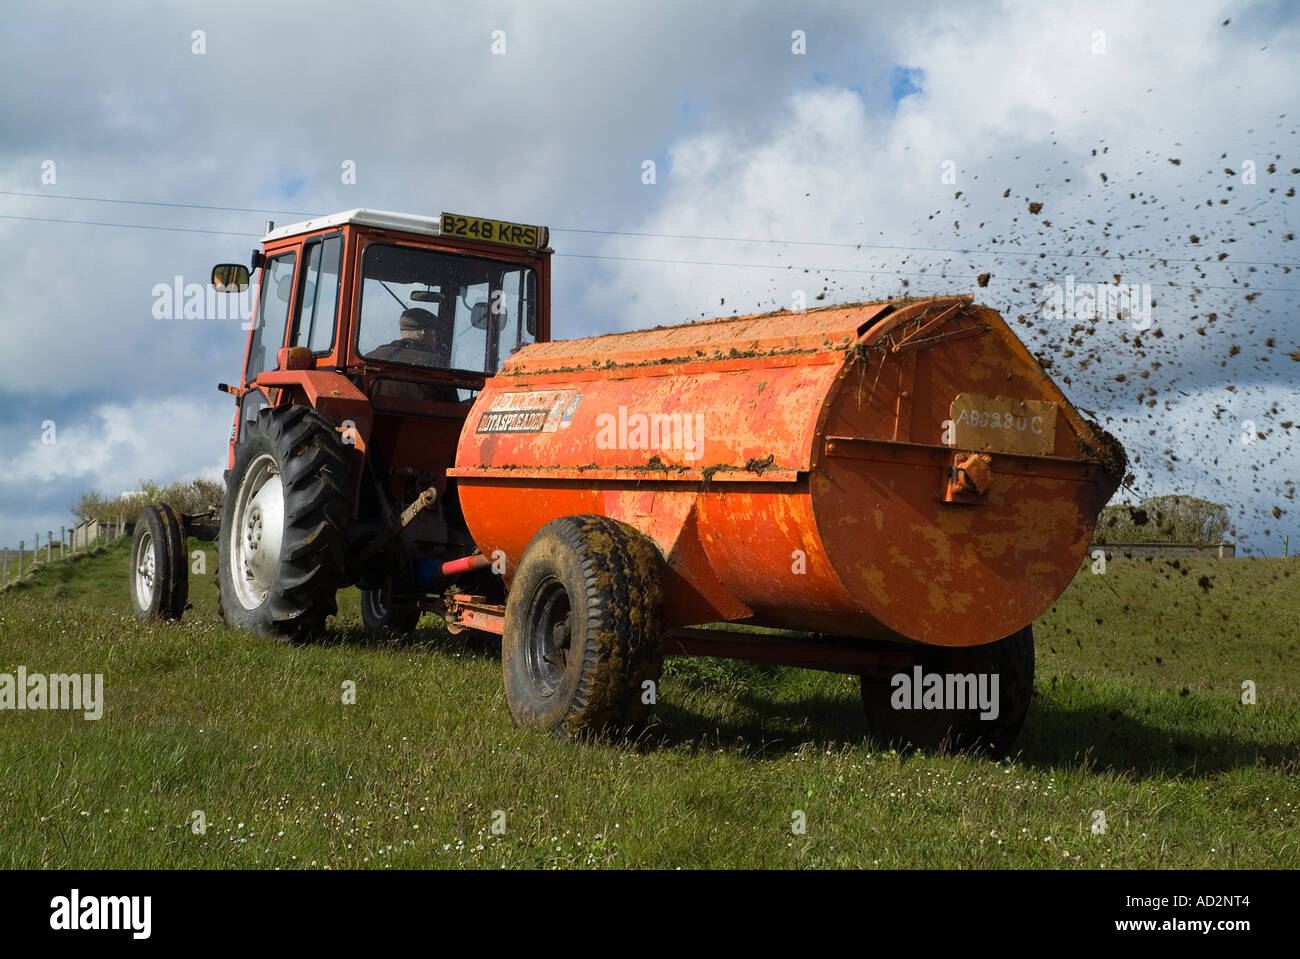 dh Massey Ferguson 240 TRACTOR FARM UK FARMING Pulling dung spreader manure  manuring spread on fields muck spreading Stock Photo - Alamy